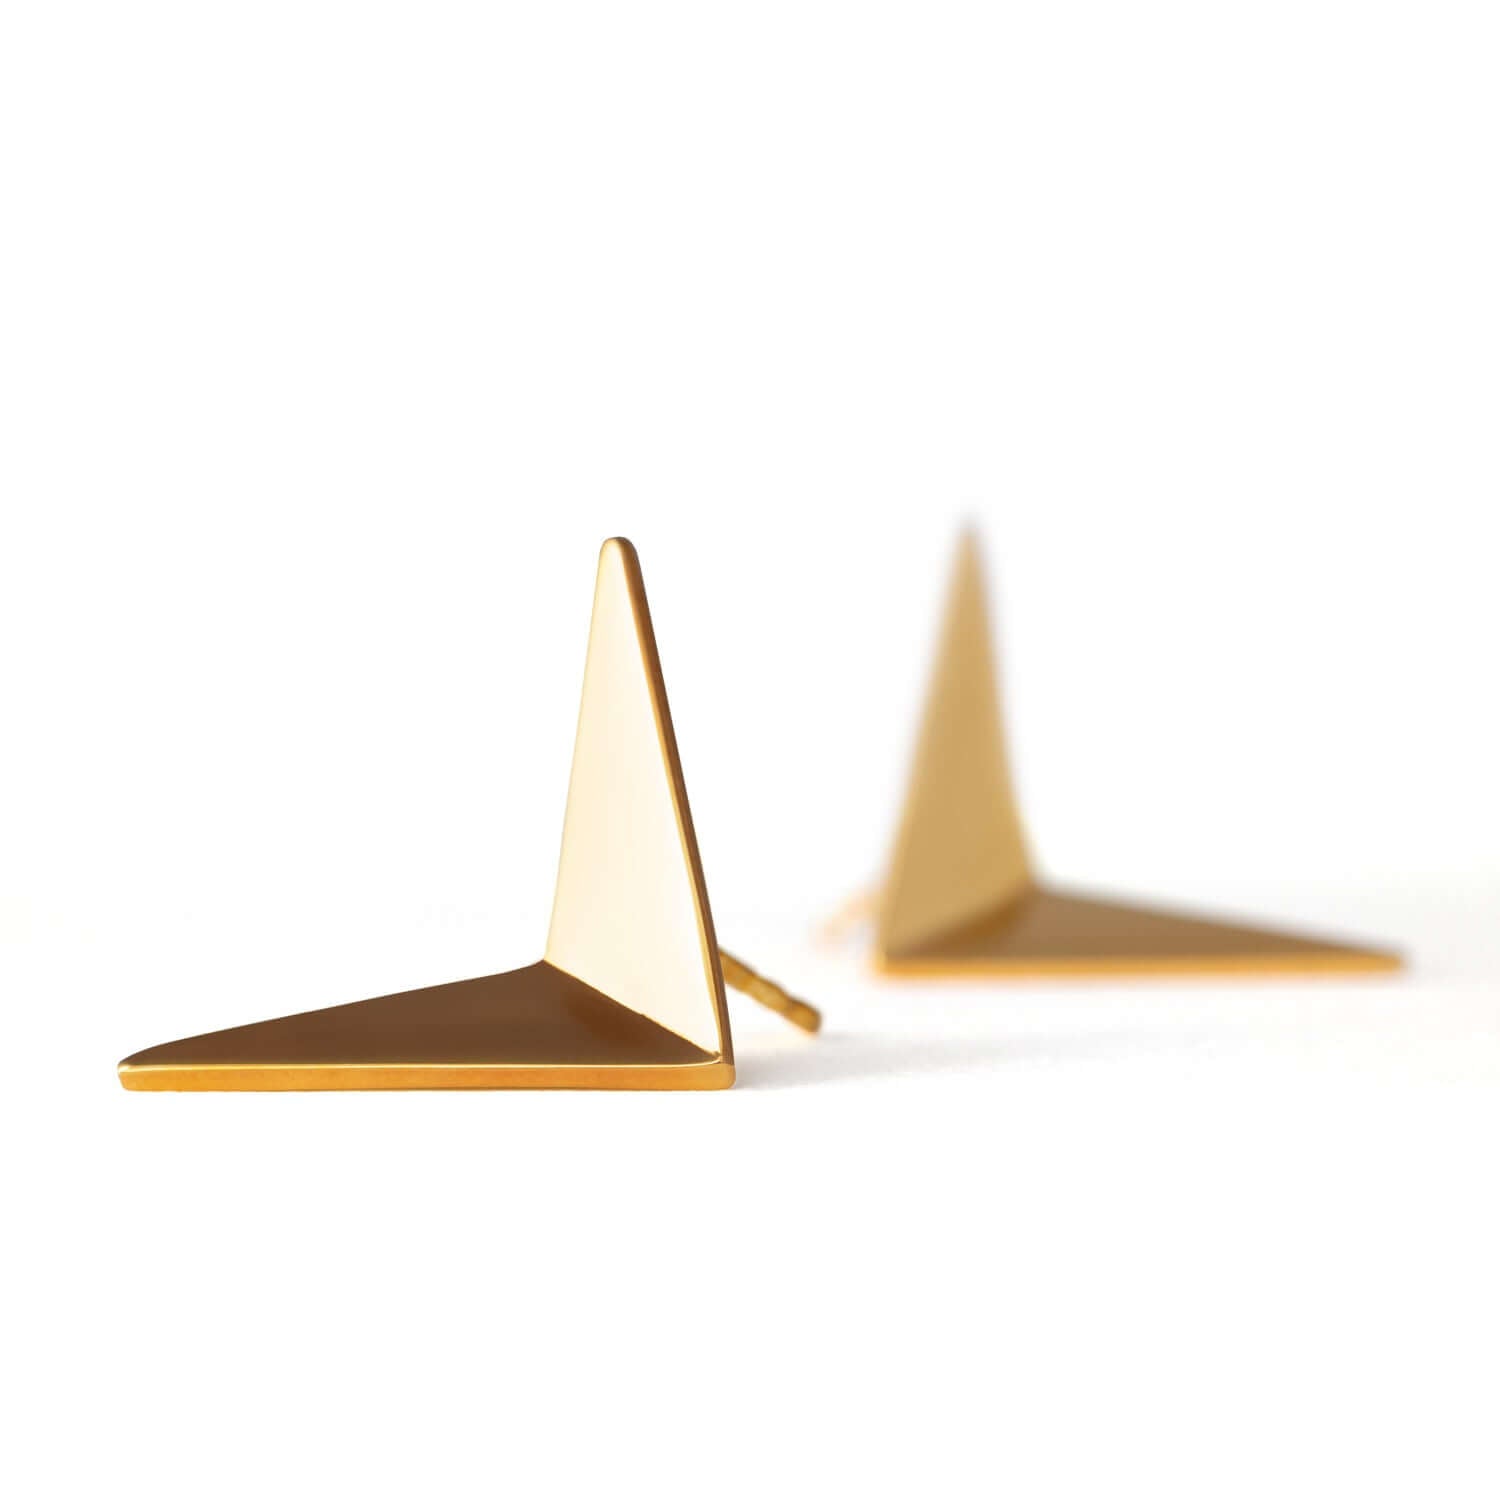 Large gold earrings inspired by the migratory birds